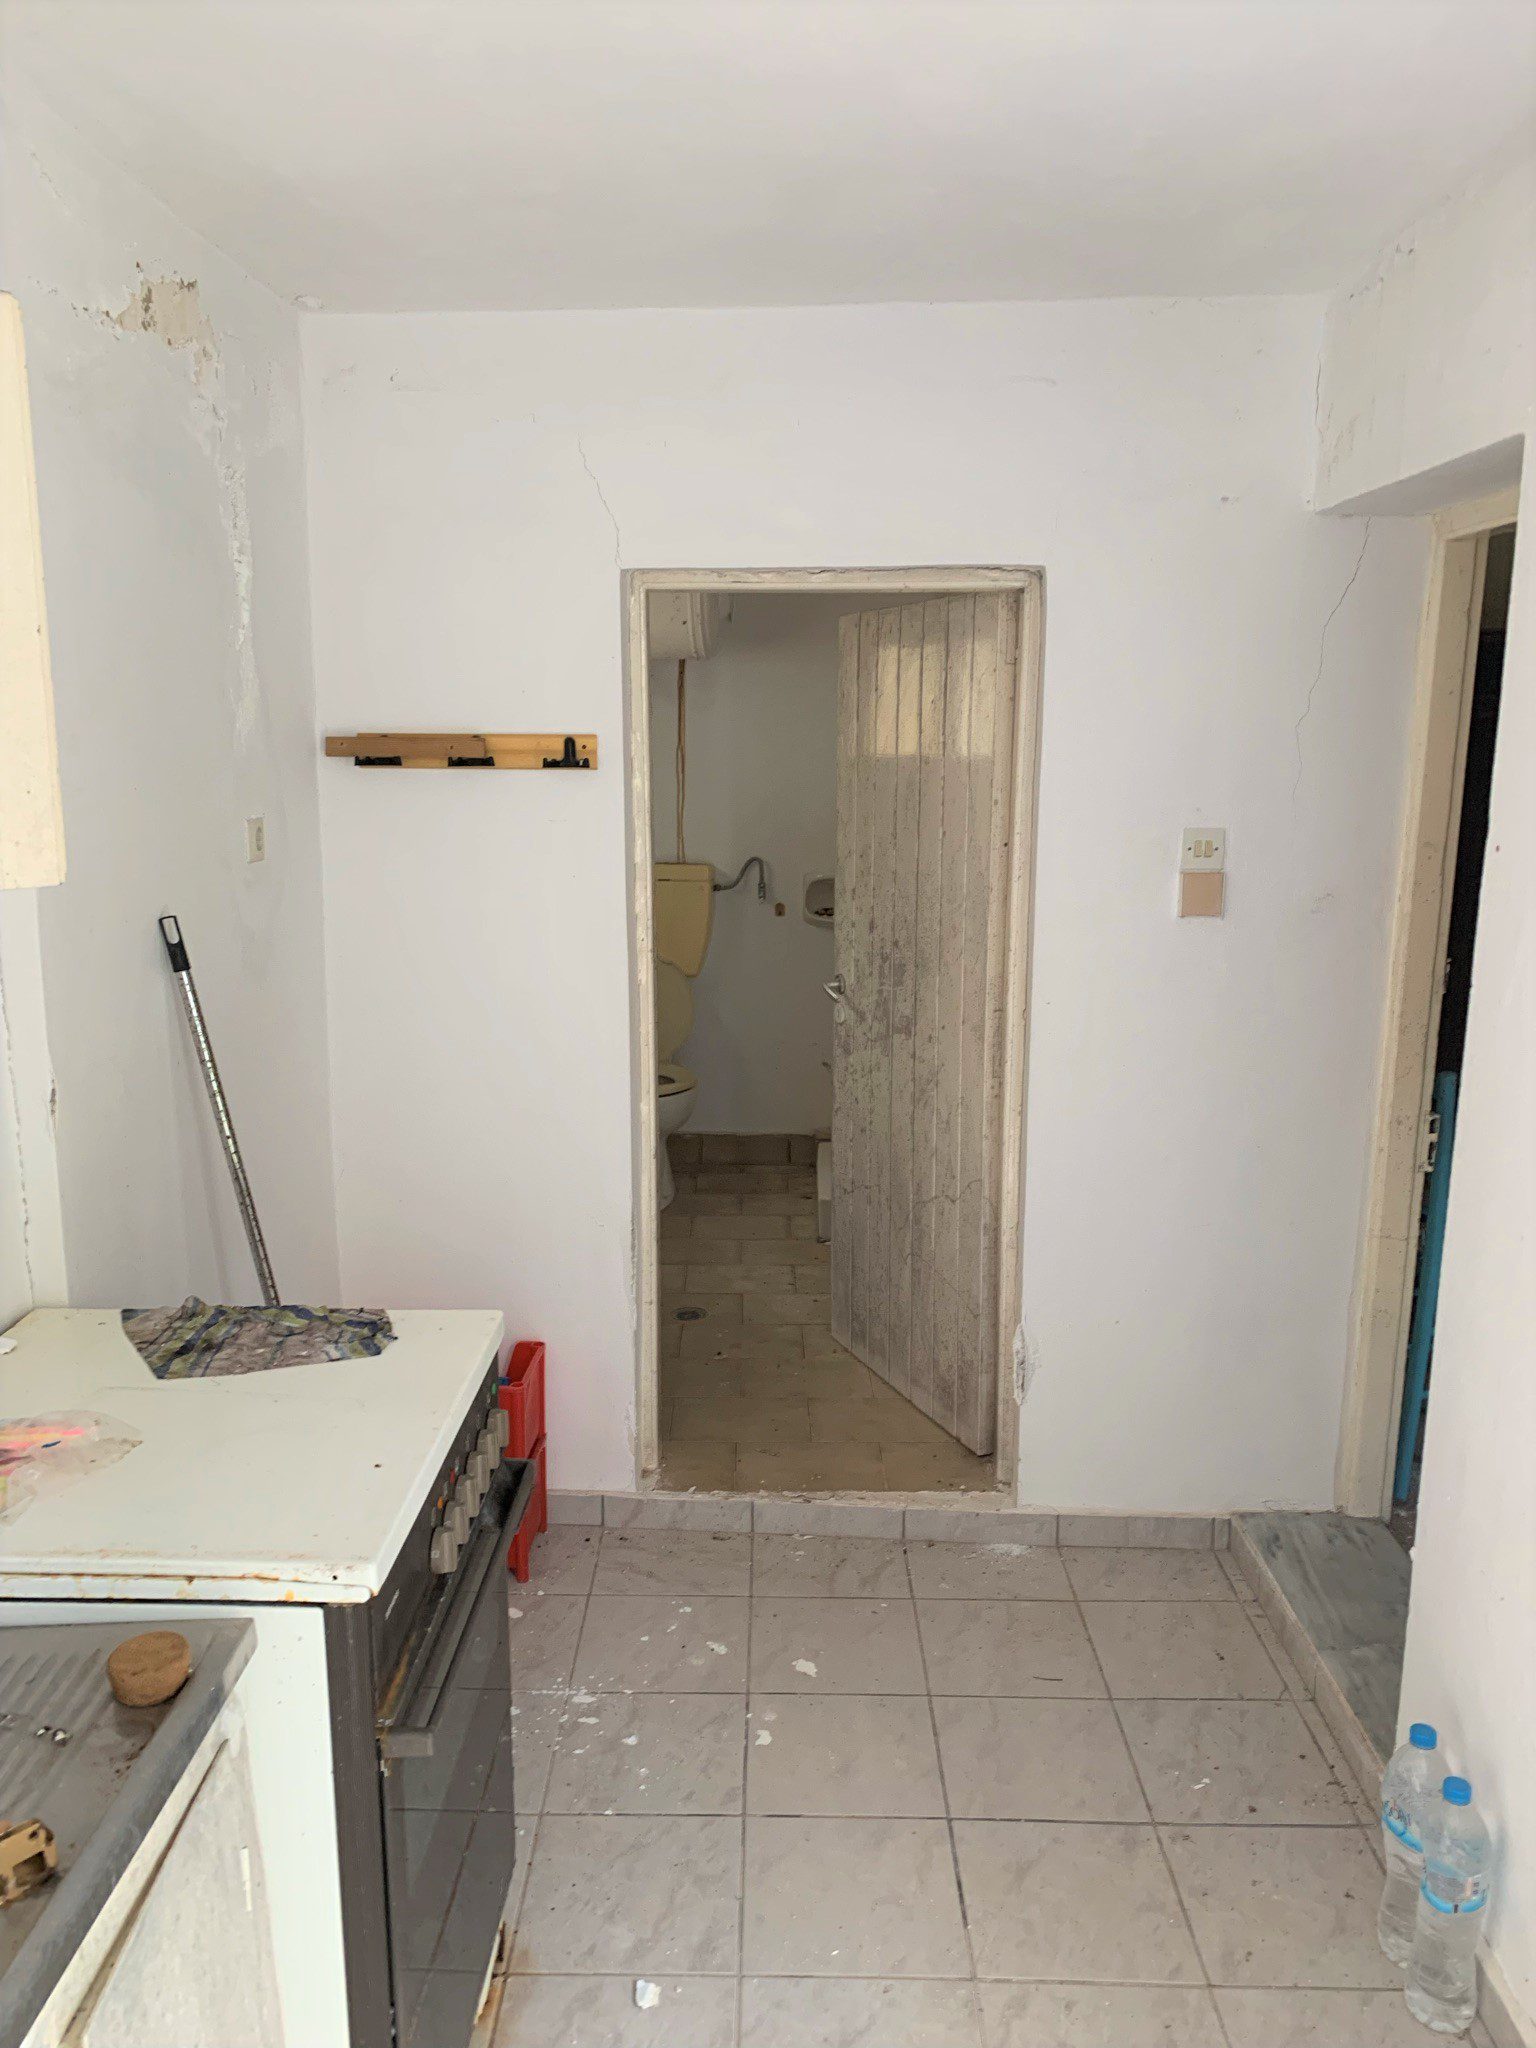 Kitchen area of house for sale Ithaca Greece, Aetos